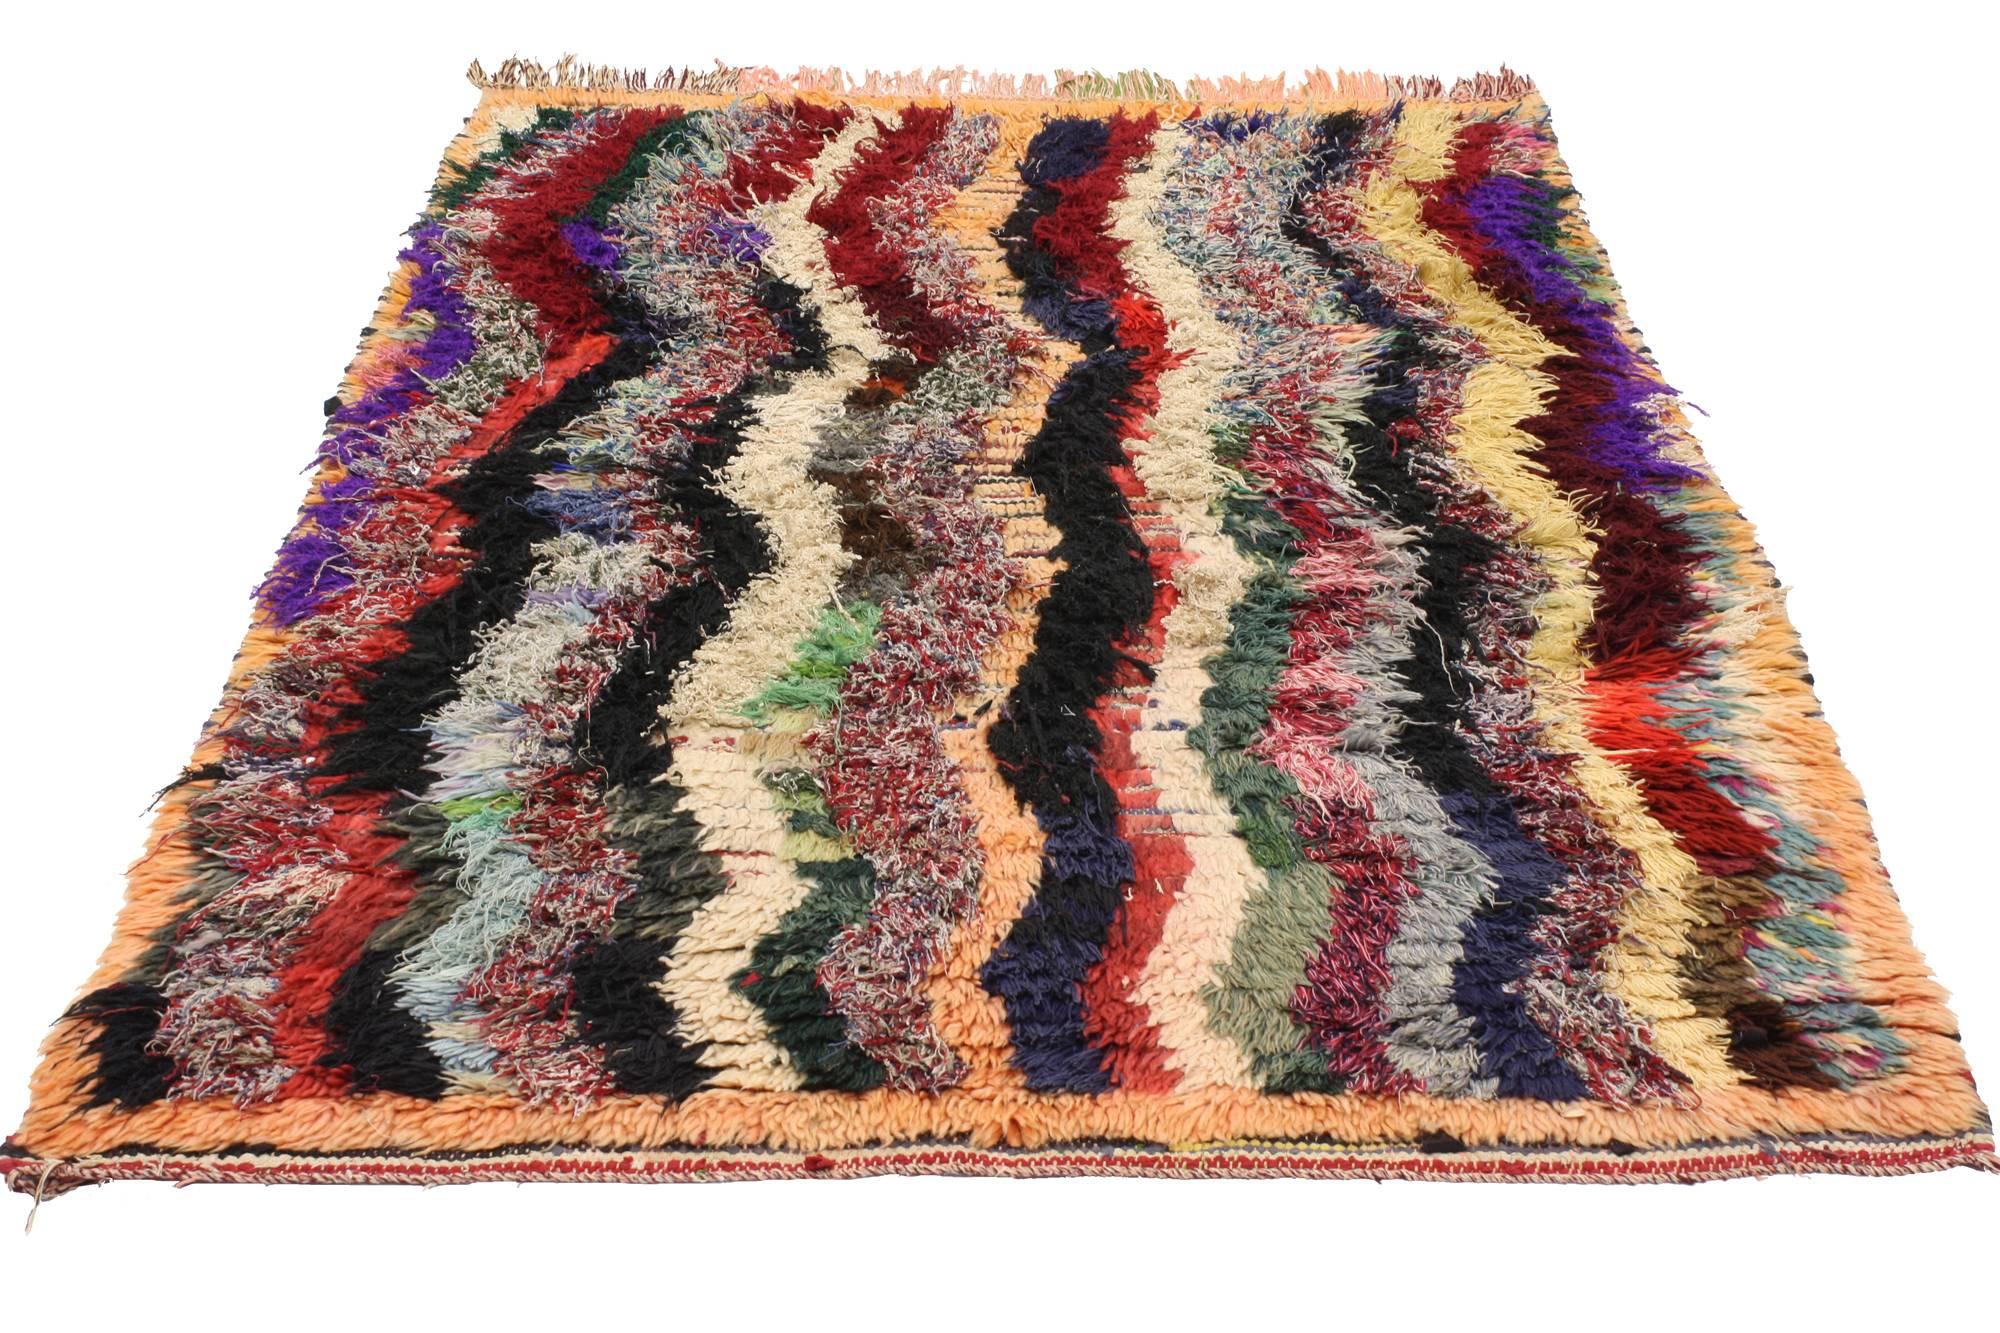 20510, vintage Berber Moroccan Boucherouite rug. This vintage Berber Moroccan Boucherouite rug marries the vintage style of the Berbers and the look of a more modern piece. This Berber Boucherouite rug features a vibrant and diverse color scheme